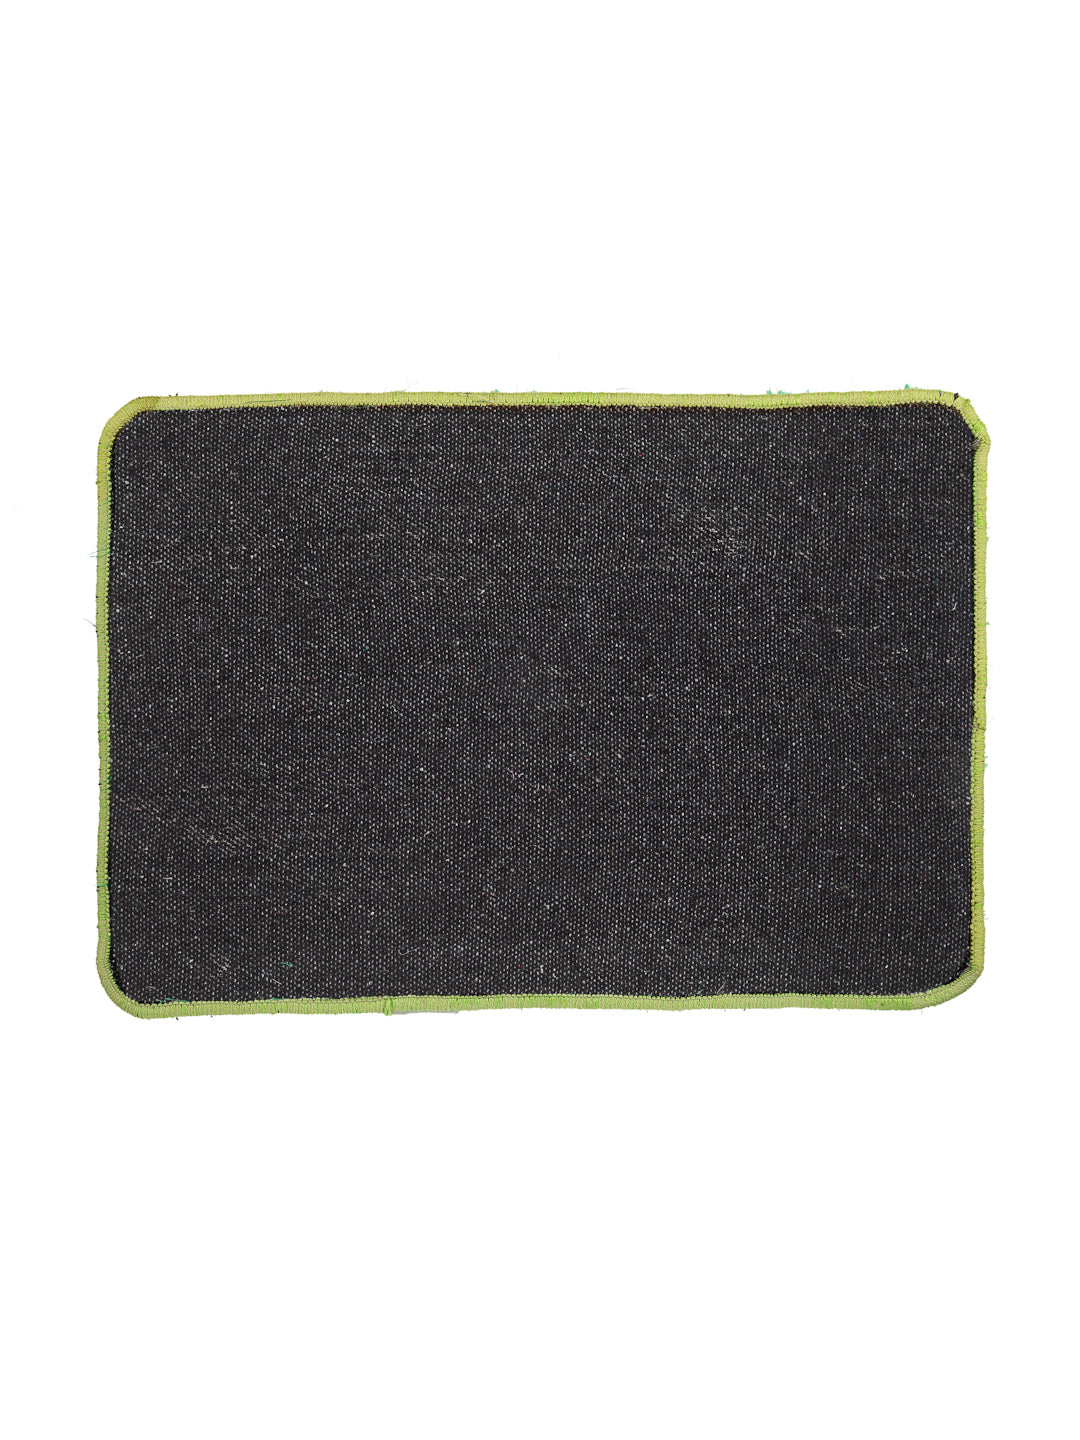 Arrabi Green Solid Synthetic Full Size Floor Mat (60 X 40 cm) (Pack of 2)